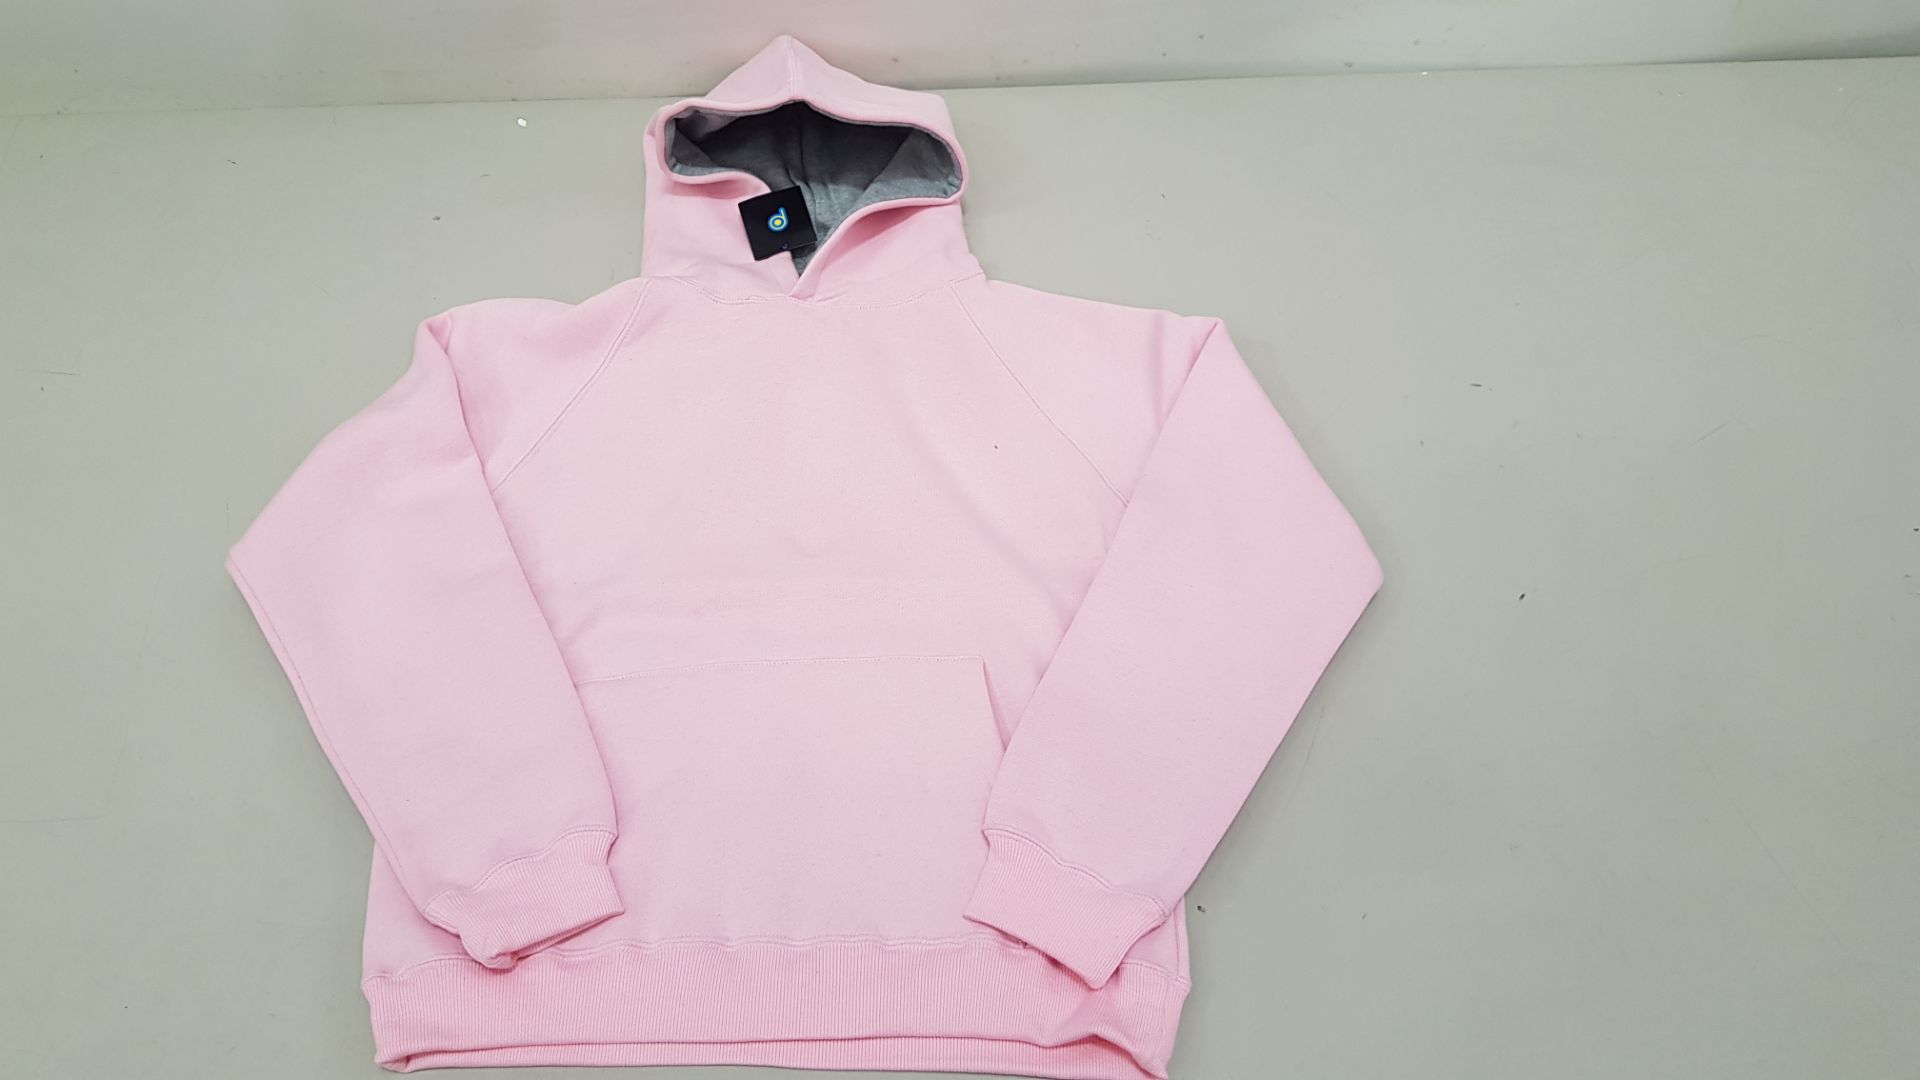 20 X BRAND NEW PAPINI HOODED SWEATSHIRTS IN PINK / GREY MARL SIZE 11-12 YEARS